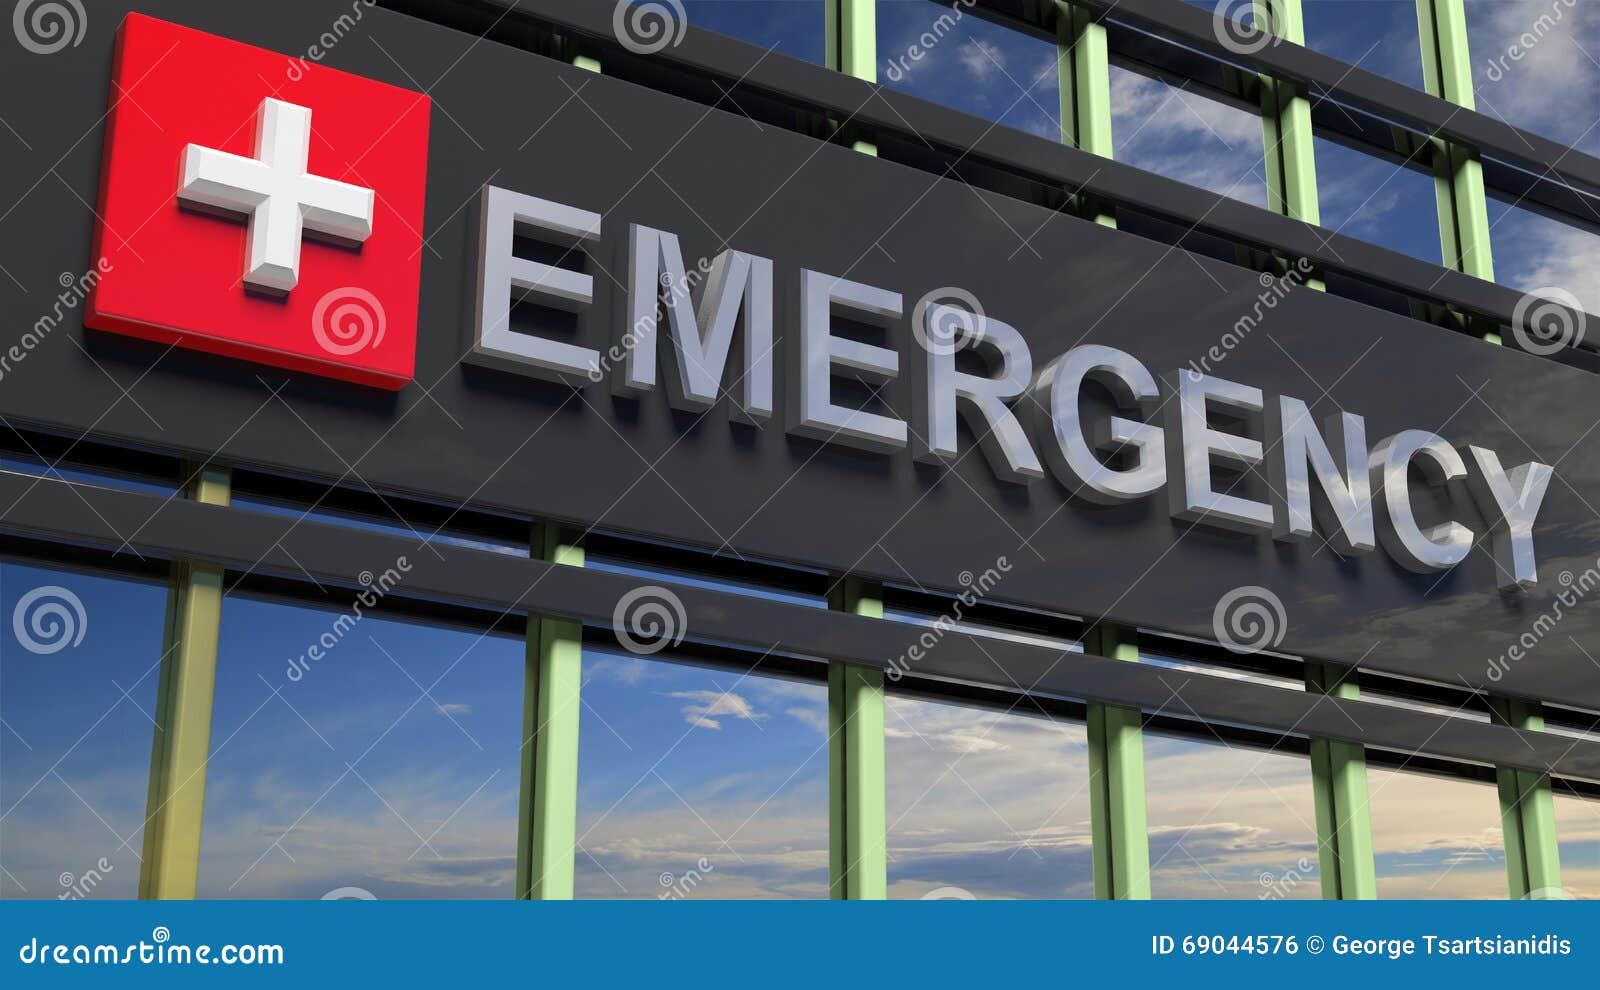 emergency department building sign closeup, with sky